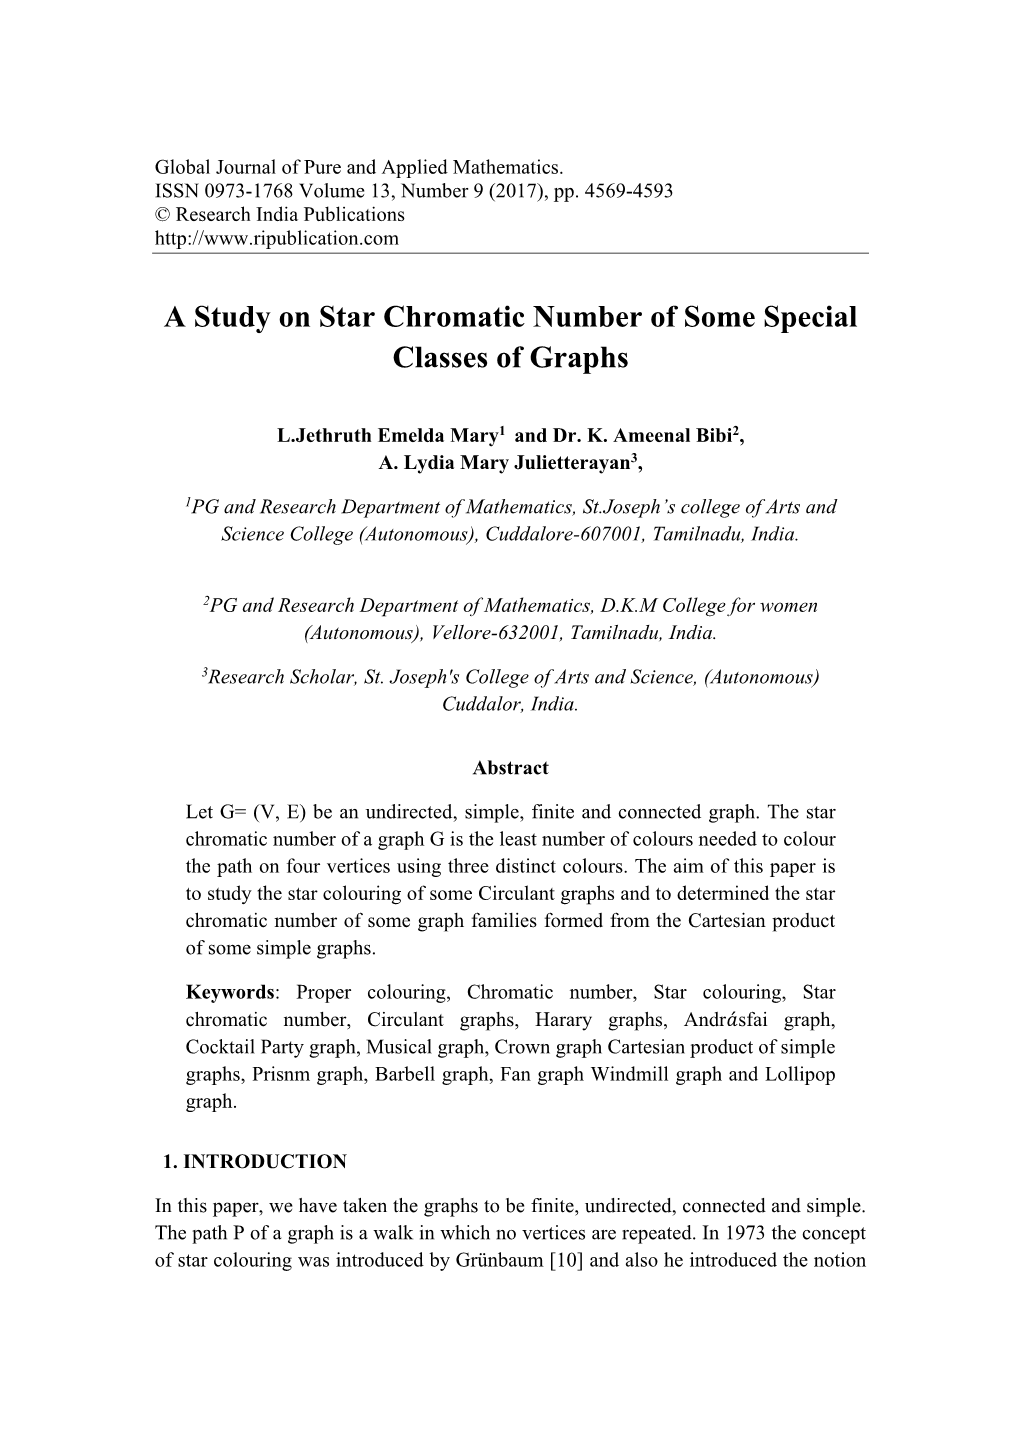 A Study on Star Chromatic Number of Some Special Classes of Graphs